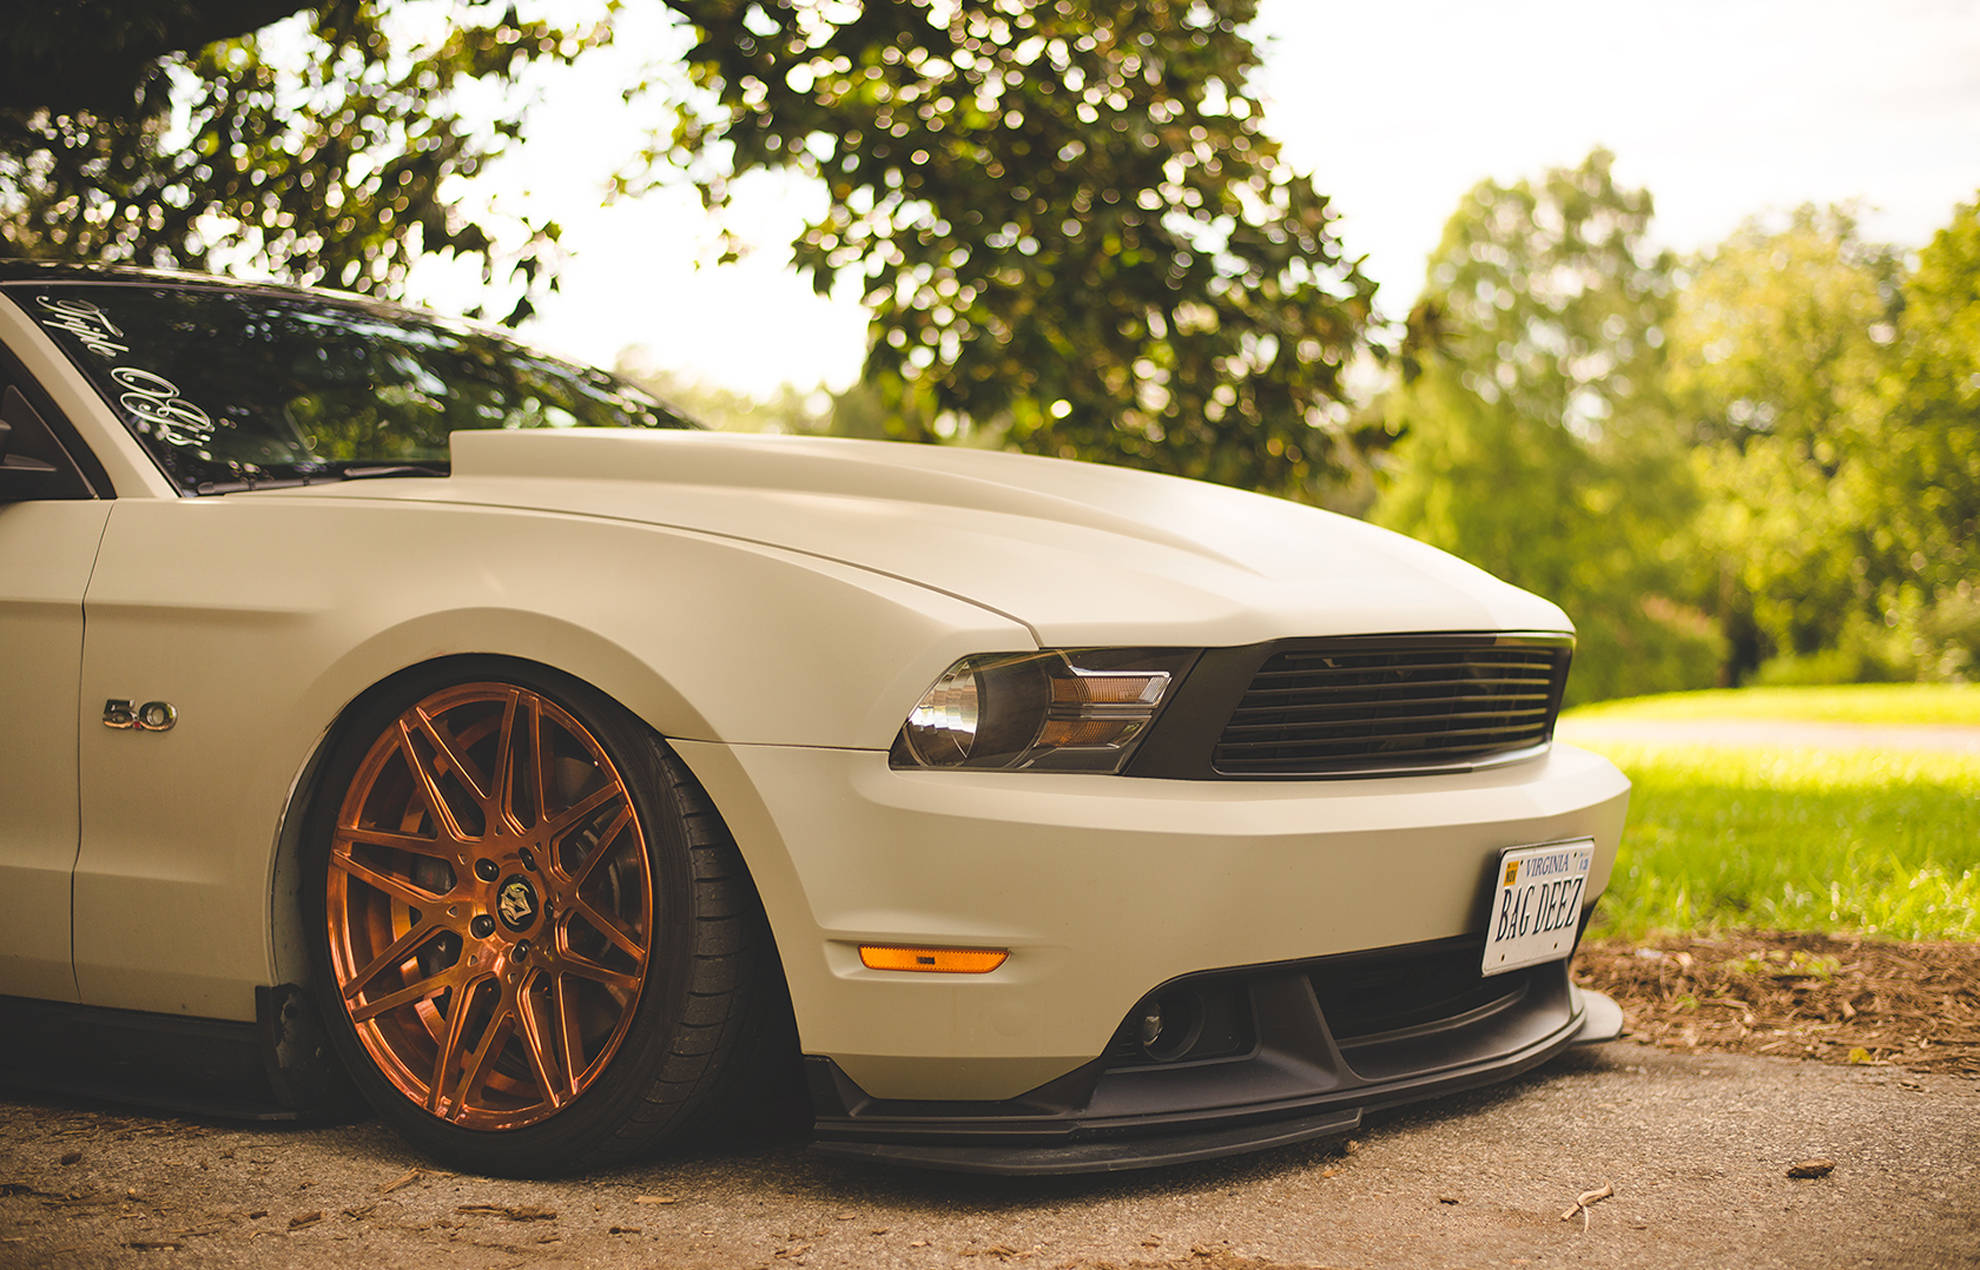 White 2010 Ford Mustang Hd Wallpaper